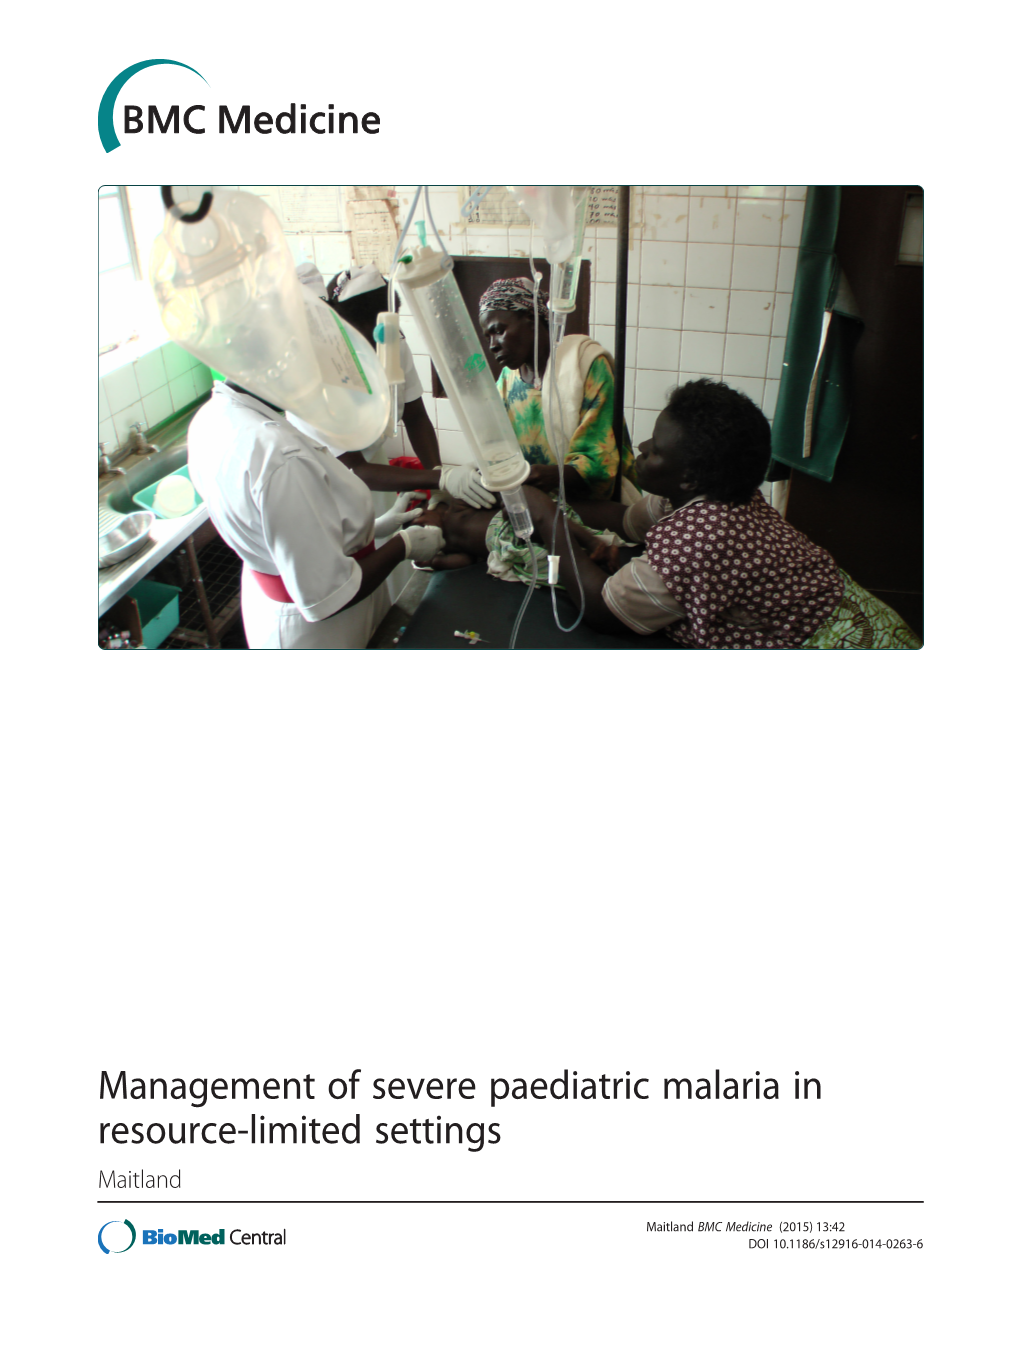 Management of Severe Paediatric Malaria in Resource-Limited Settings Maitland